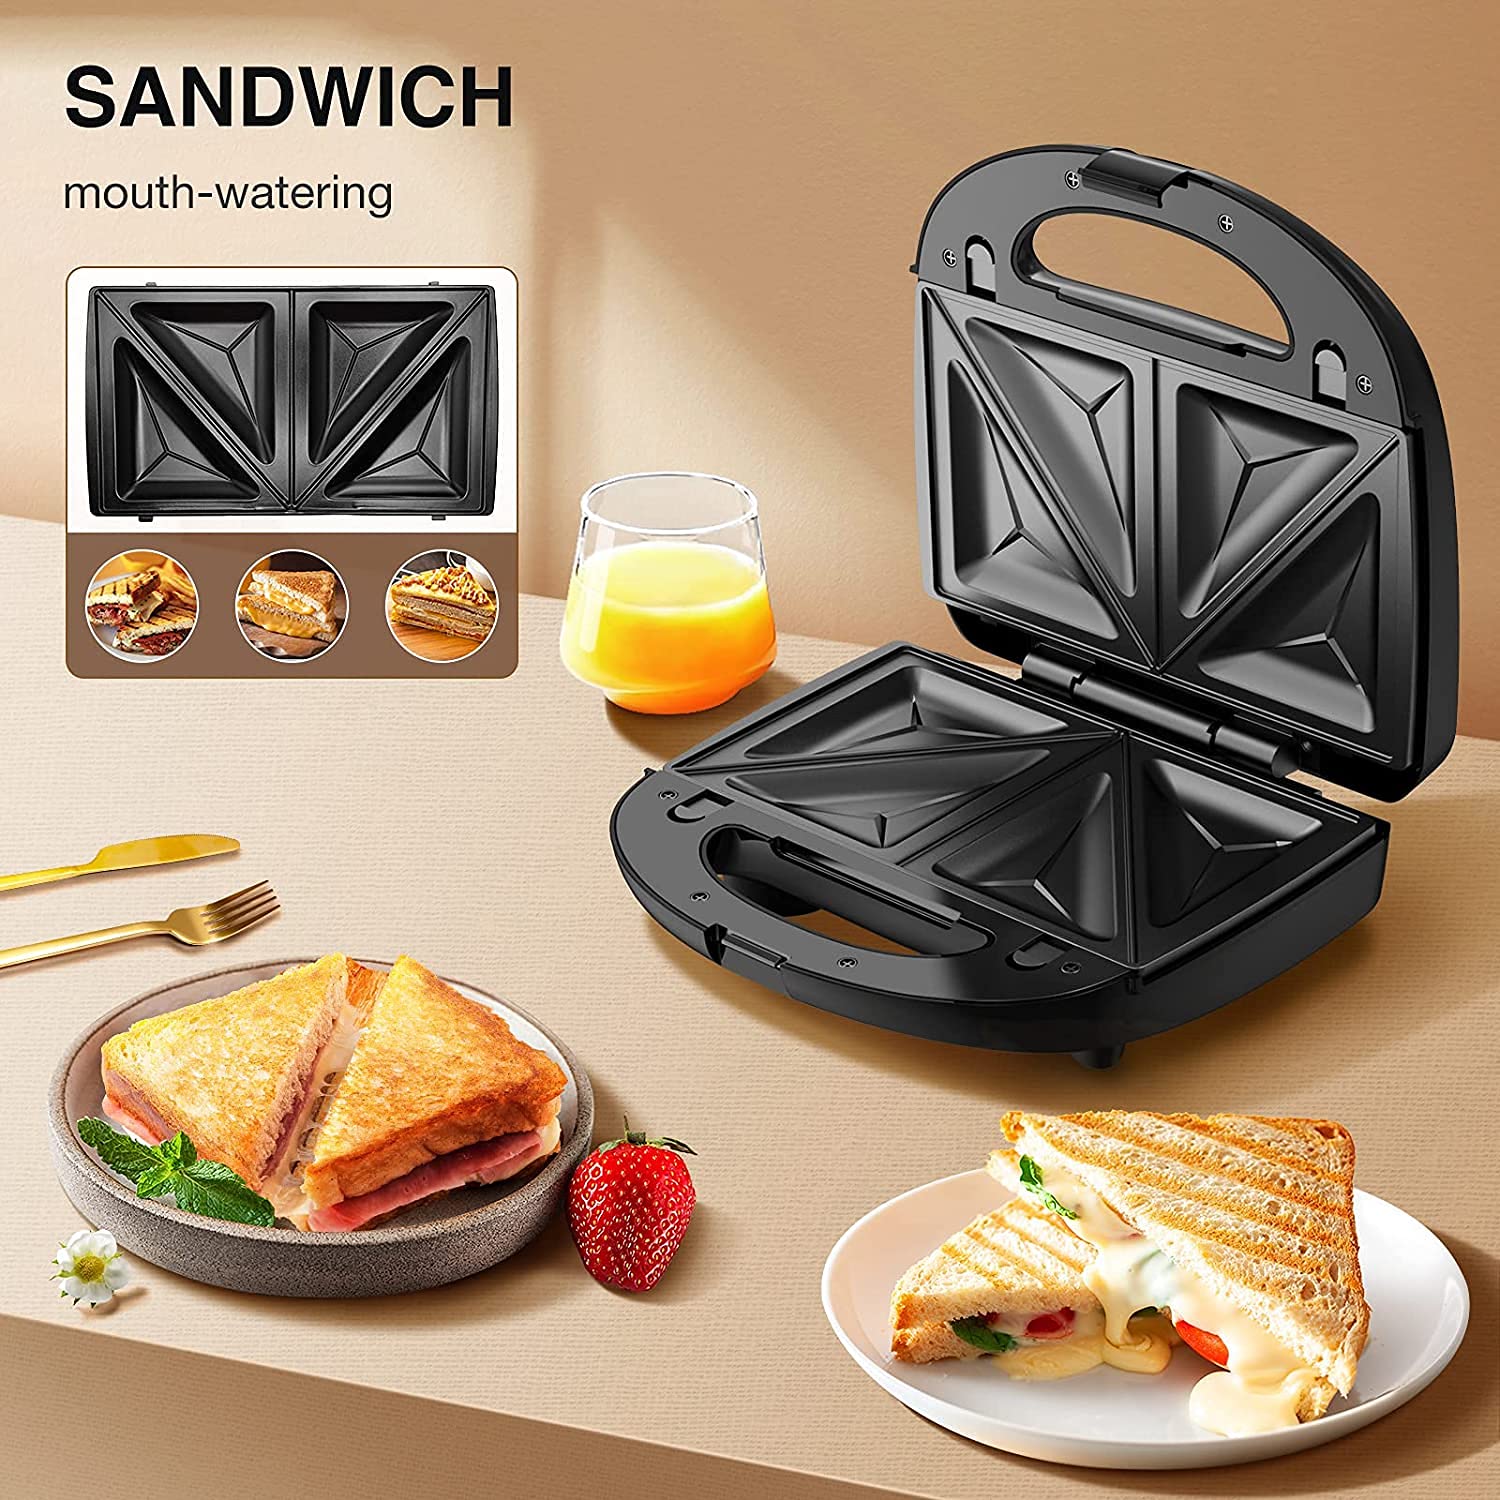 5-in-1 Belgian Waffle Maker, 750W Power Sandwich Maker, Non Stick Panini Press Grill, 2-Slice Compact Toaster, Electric Grilled Cheese Maker, 3 Detachable Plates, LED Indicator Lights, Suitable for Breakfast & Snacks